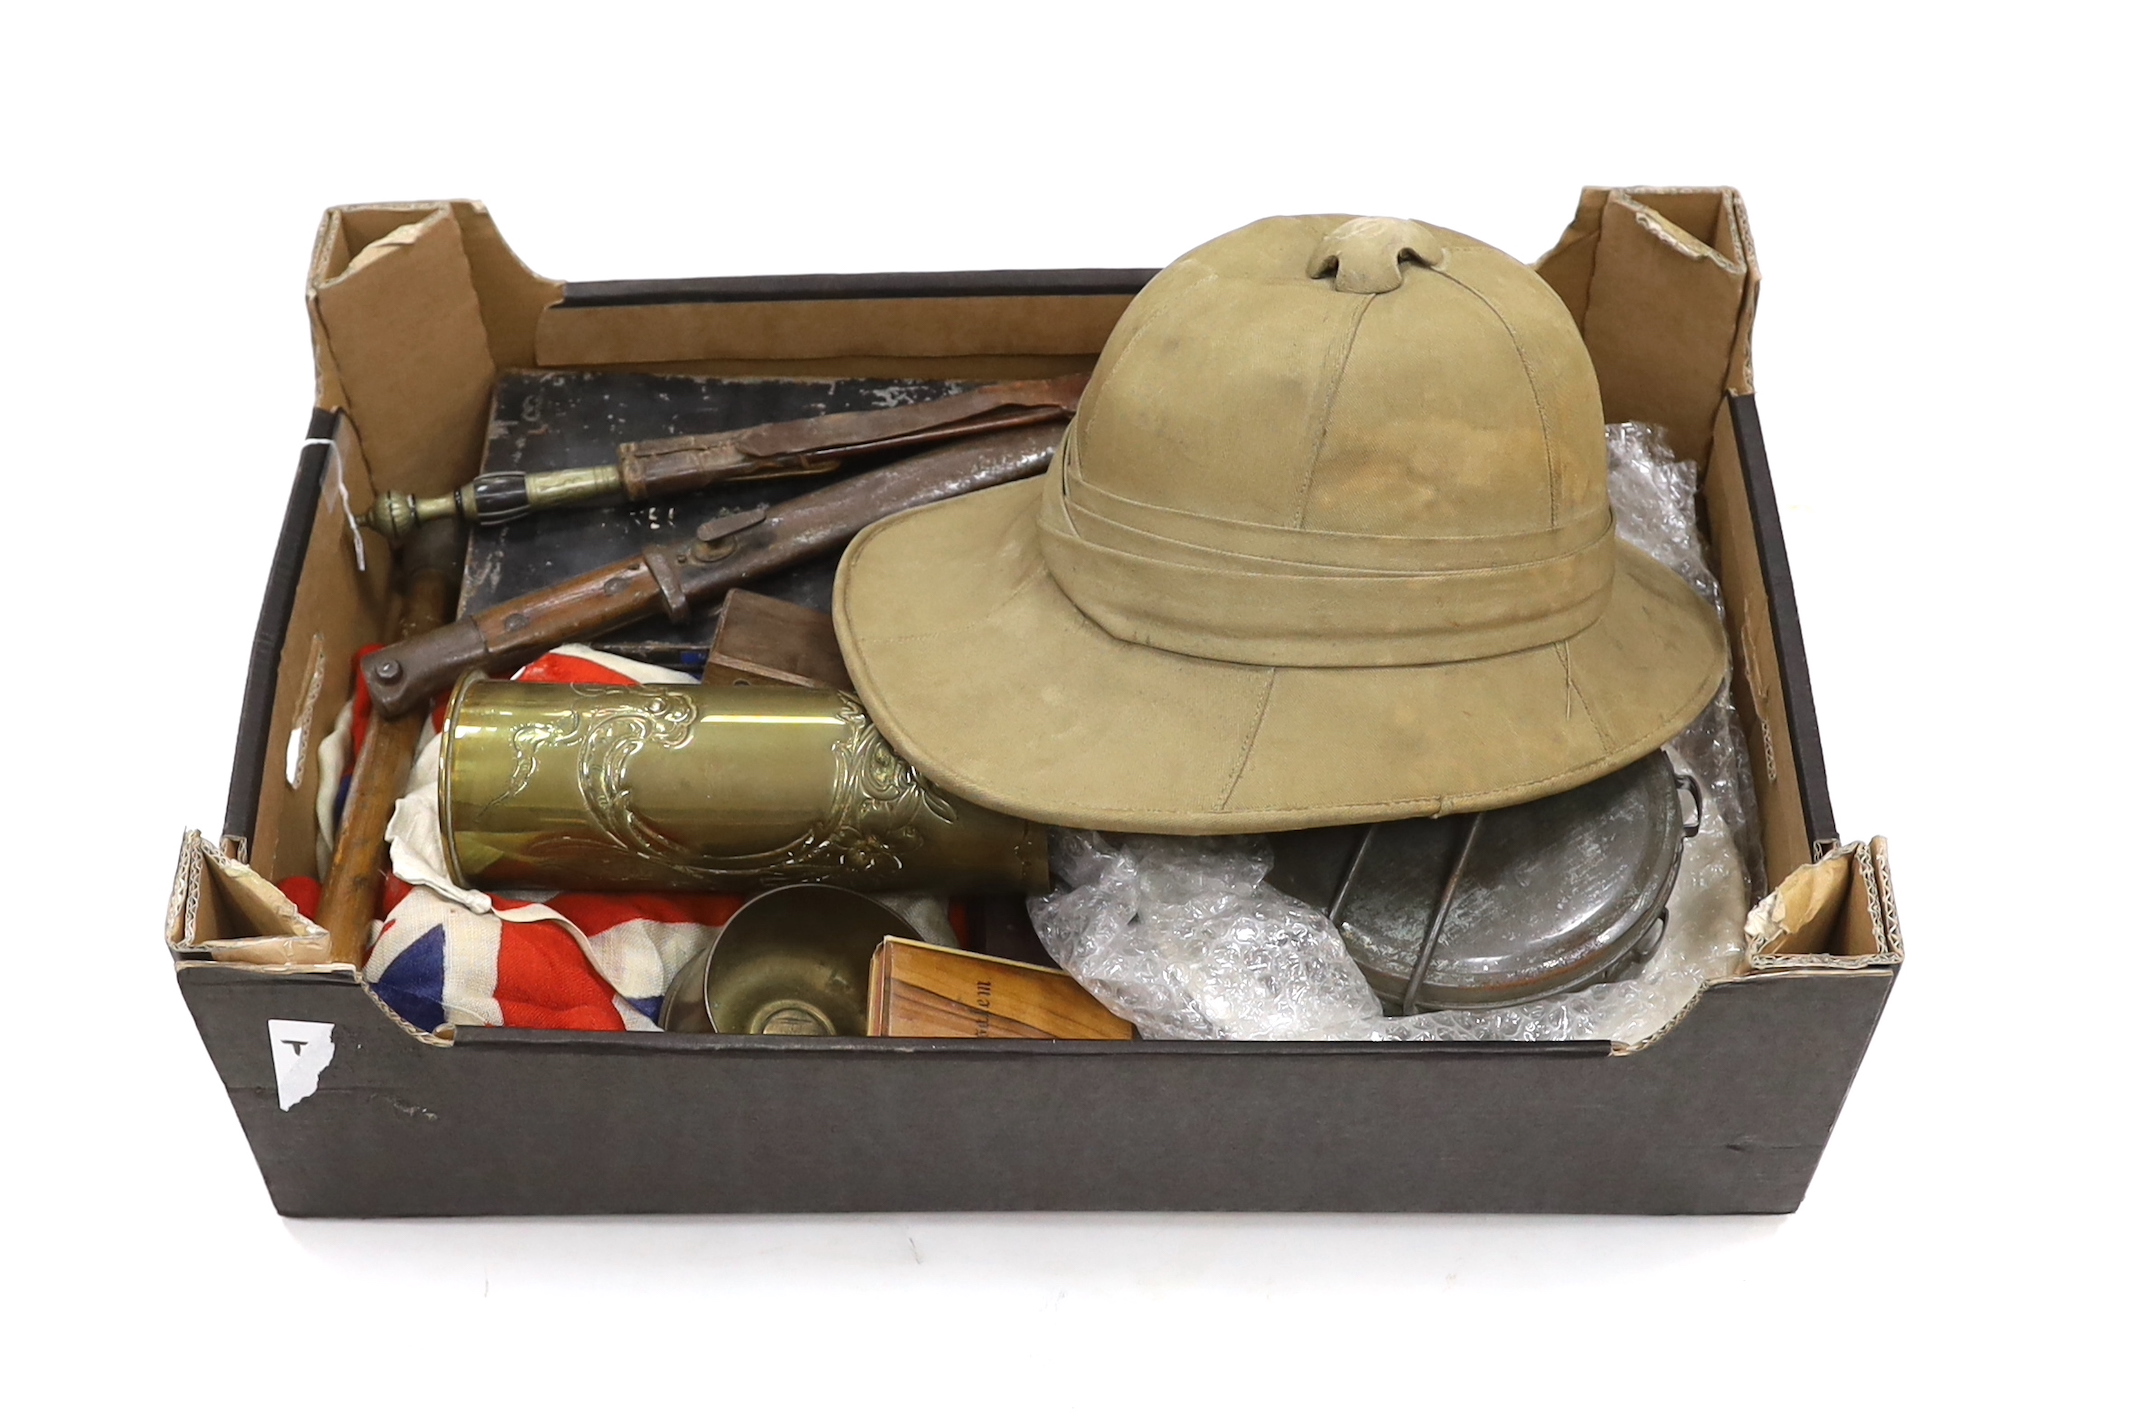 A collection of militaria including; a pith helmet, a T.G. Co. Ltd. Mk.III compass, a cased protractor, a Union flag, a trench art shell casing, a bayonet, an Indian knife, a mess plate with ERII cypher, etc.